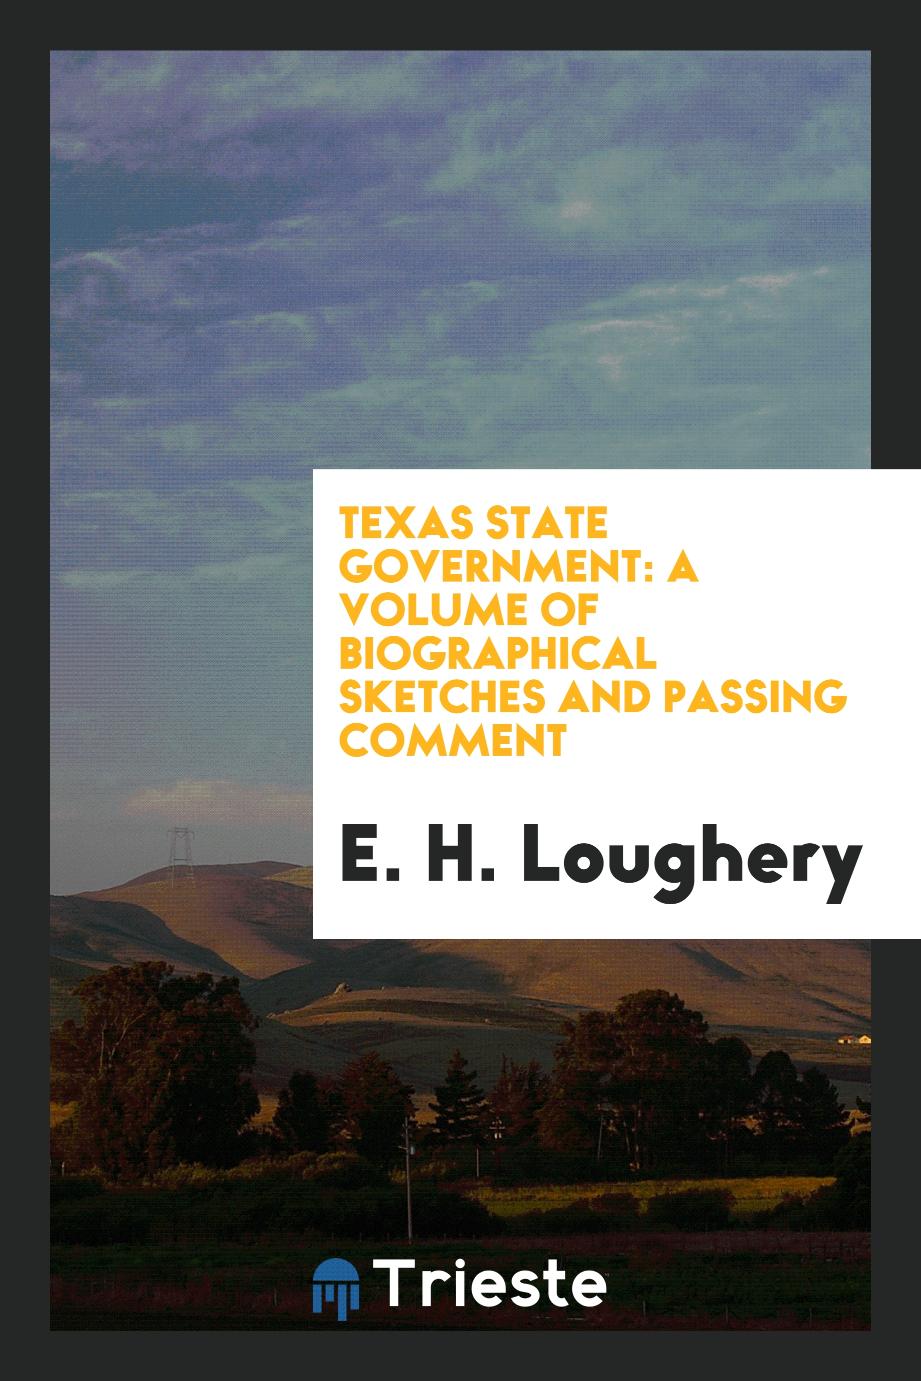 Texas State Government: A Volume of Biographical Sketches and Passing Comment